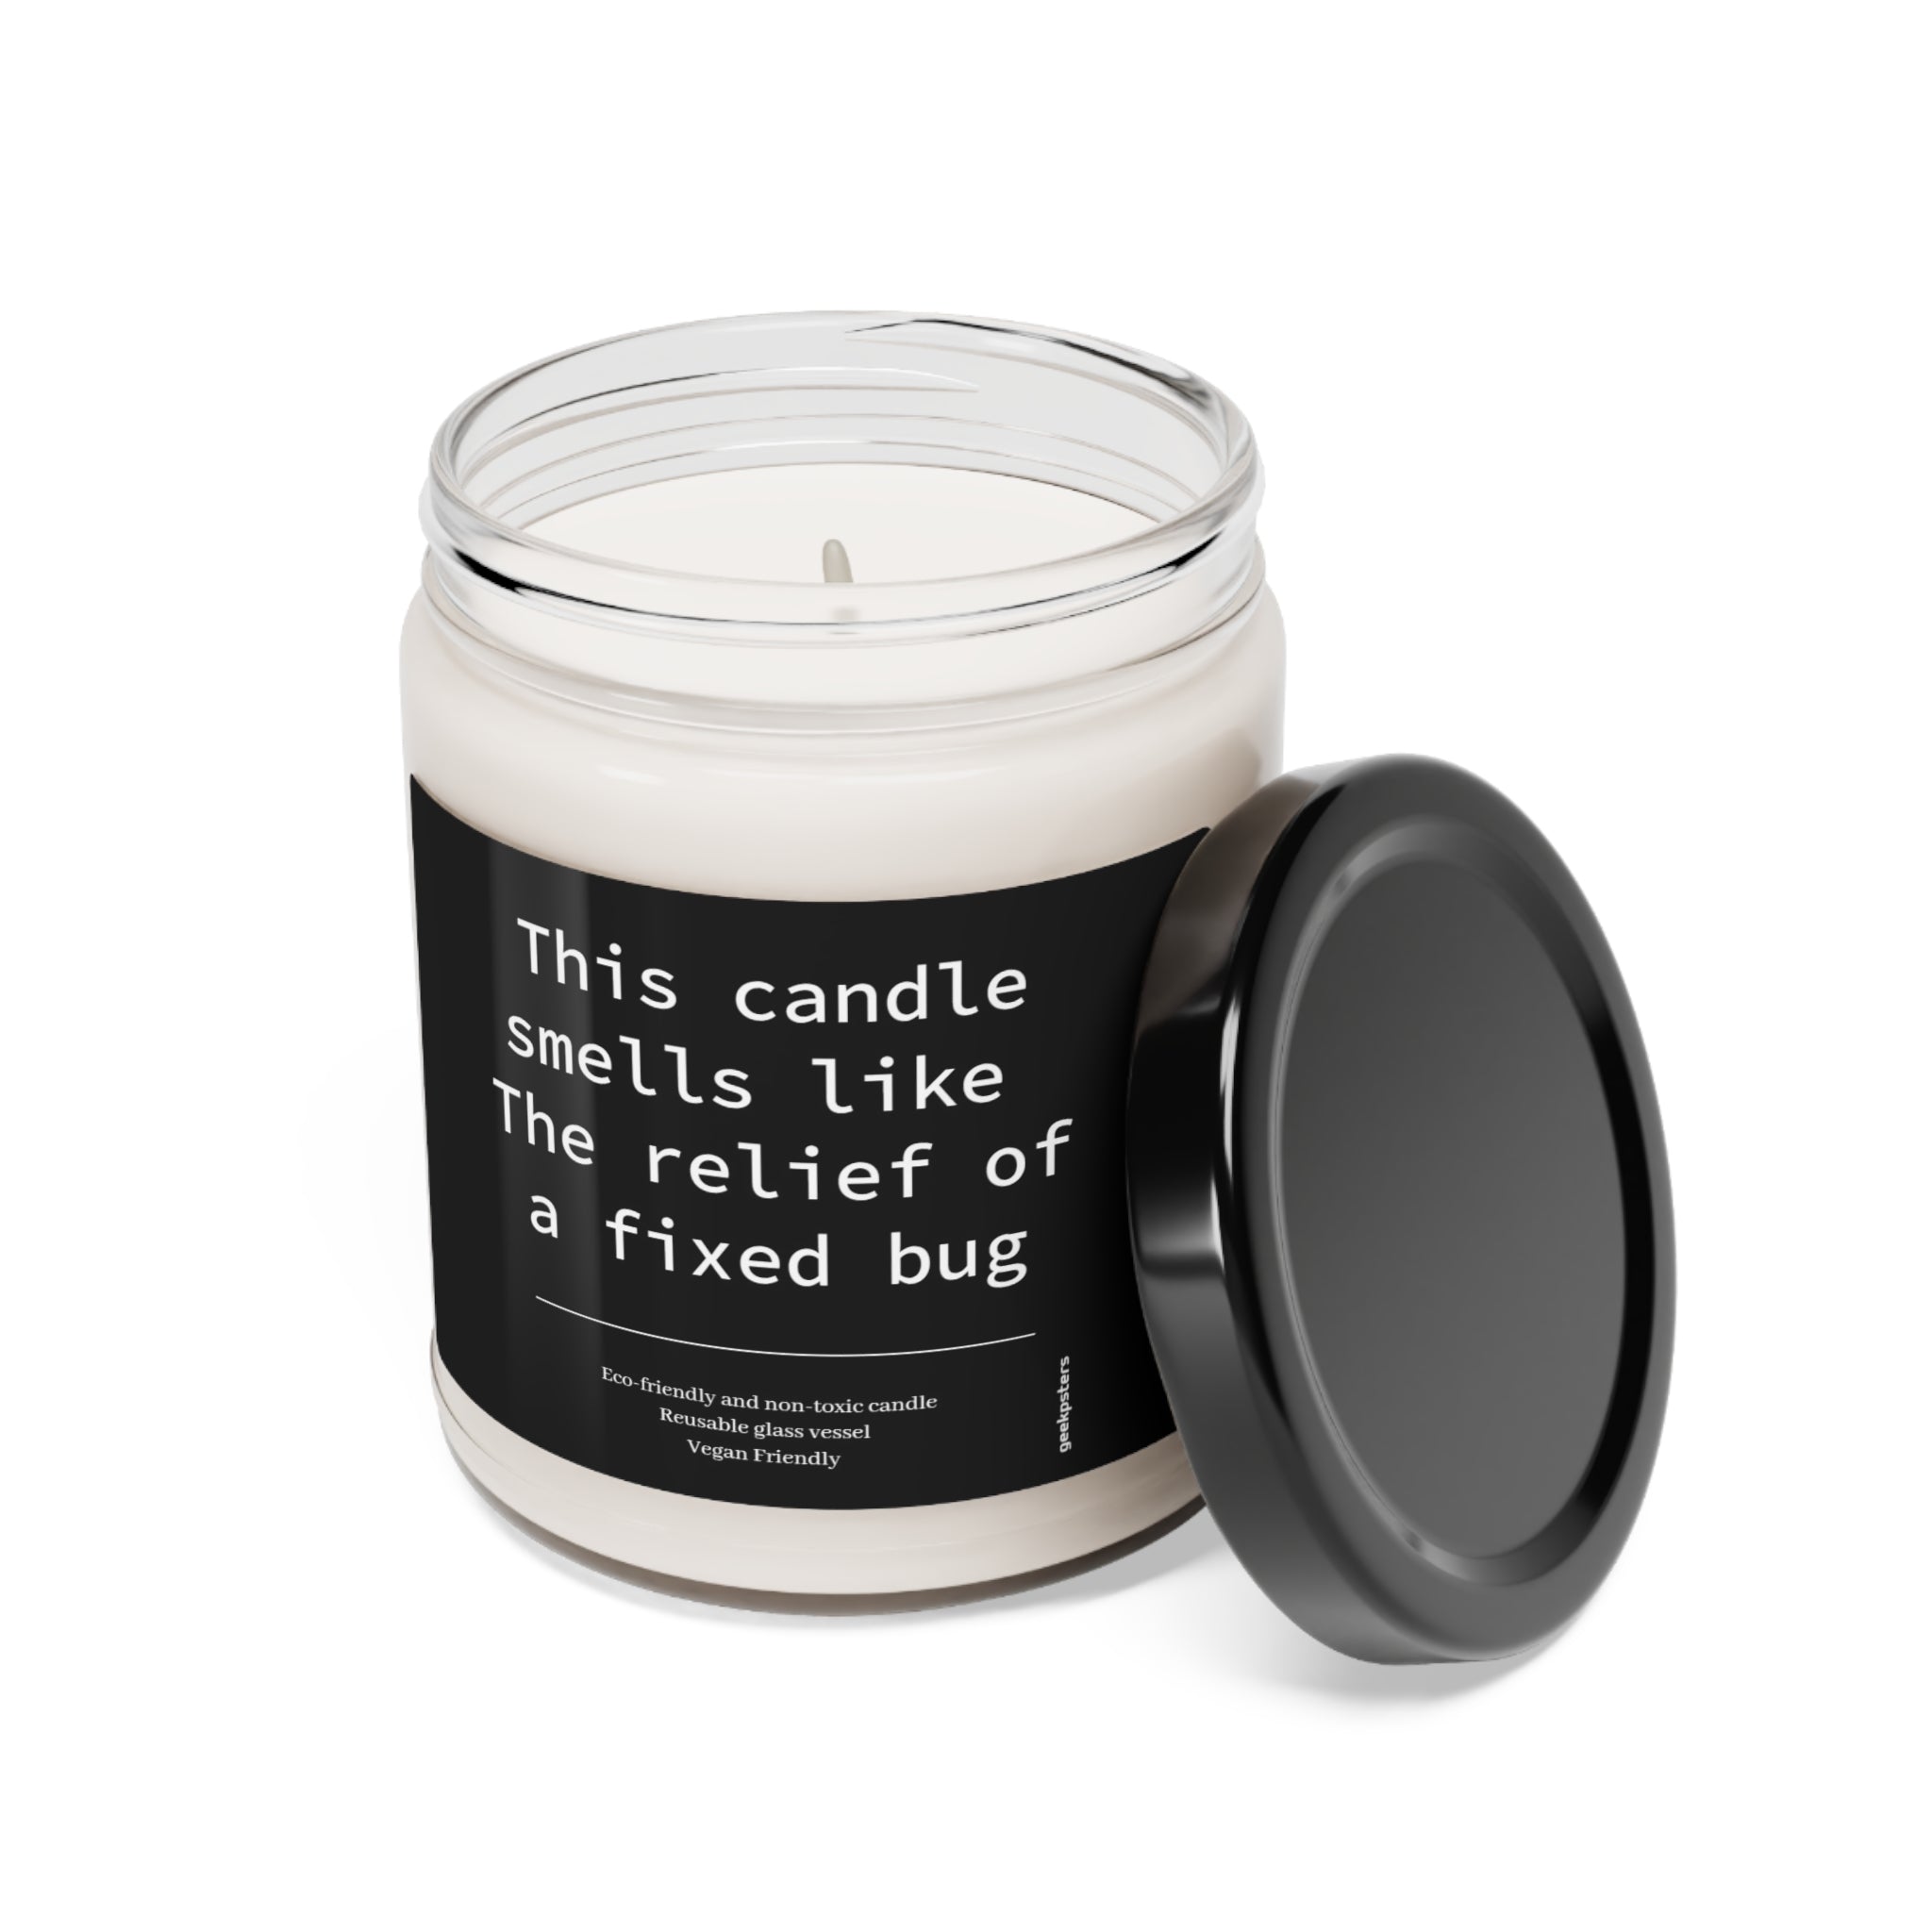 A white soy candle in a clear glass jar with a black lid, labeled "This Candle Smells Like The Relief of a Fixed Bug." The jar stands on a white background.